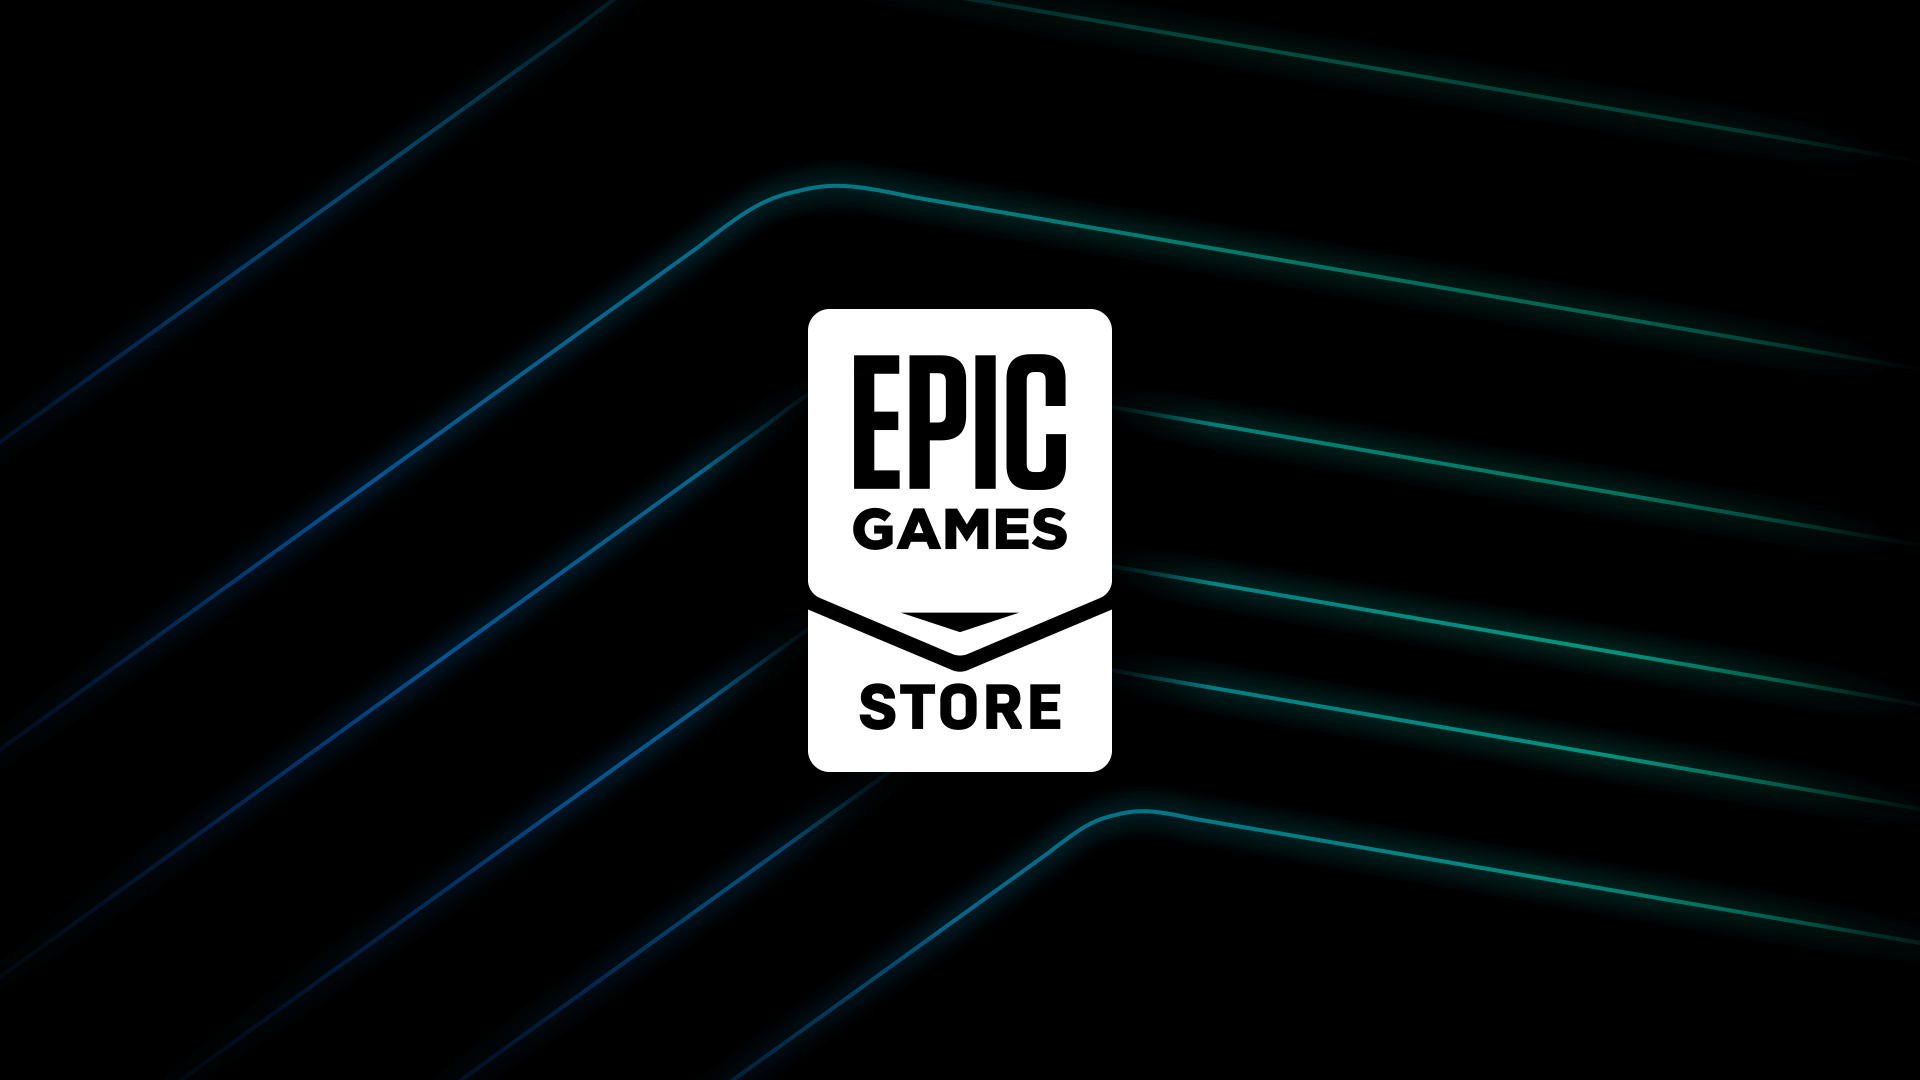 Even five years after its launch, the Epic Games Store remains unprofitable